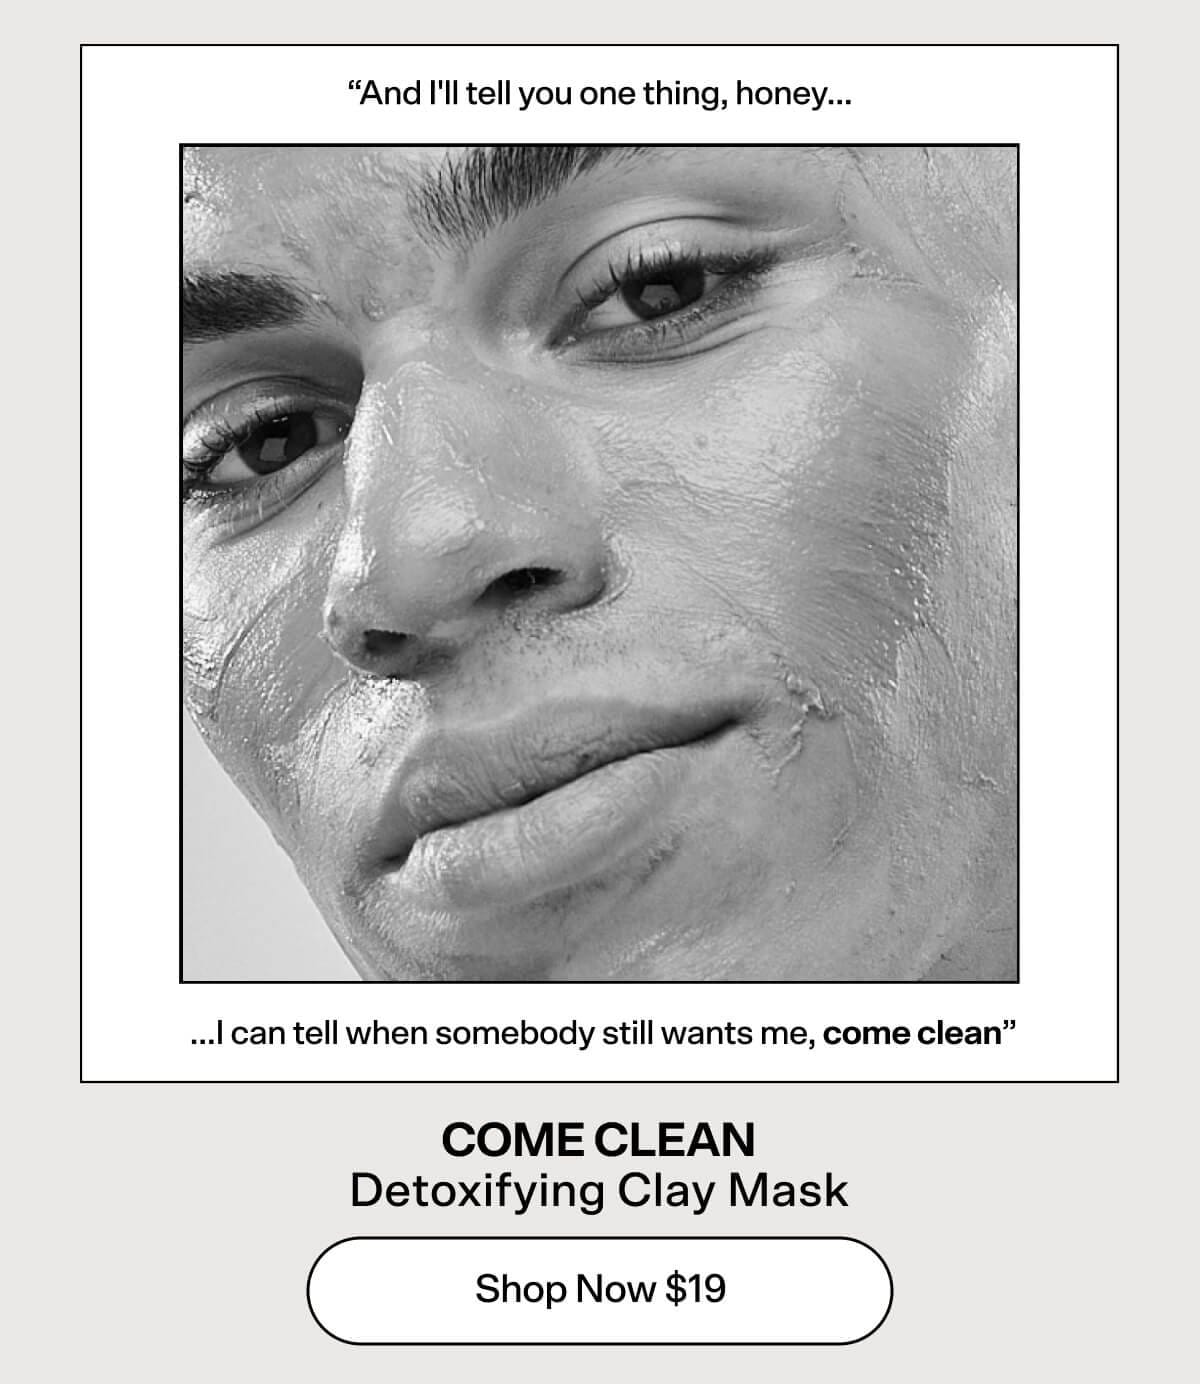 "And I'll tell you one thing, honey...I can tell when somebody still wants me, come clean" COME CLEAN Detoxifying Clay Mask [Shop Now \\$19]